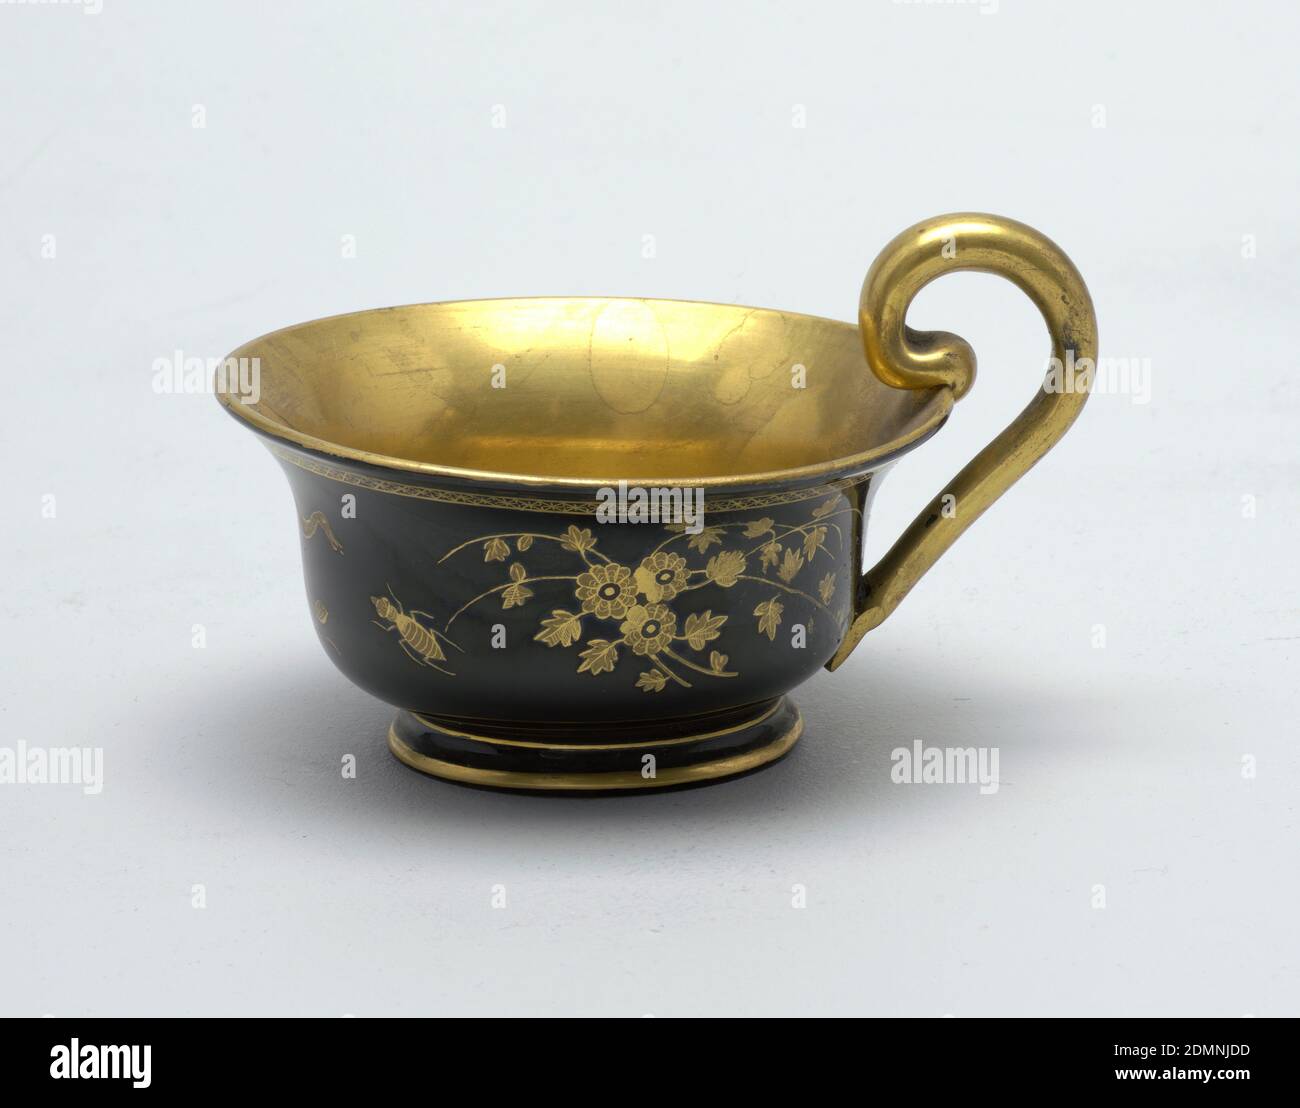 Cup and saucer, Glass, Gold and black decoration,gold cup interior and handle; exterior black with gold decoration (floral and animal). Saucer black with gold geometric border and gold floral and animal decoration., Austria or Bohemia, 19th century, glasswares, Decorative Arts, Cup and saucer Stock Photo